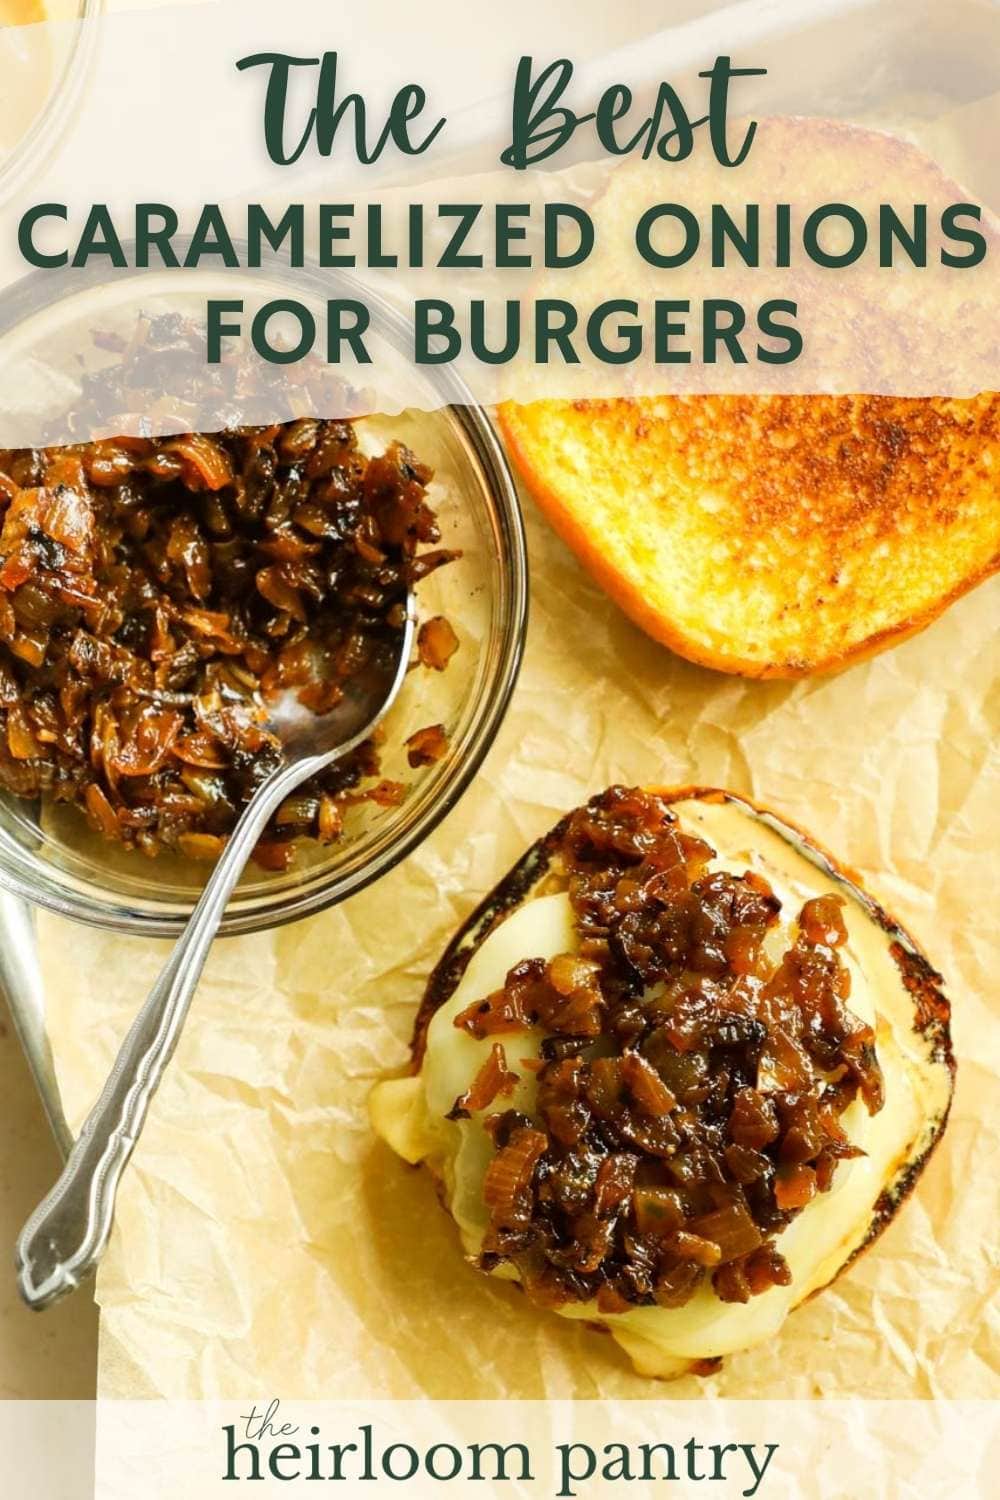 Pinterest pin for caramelized onions for burgers.